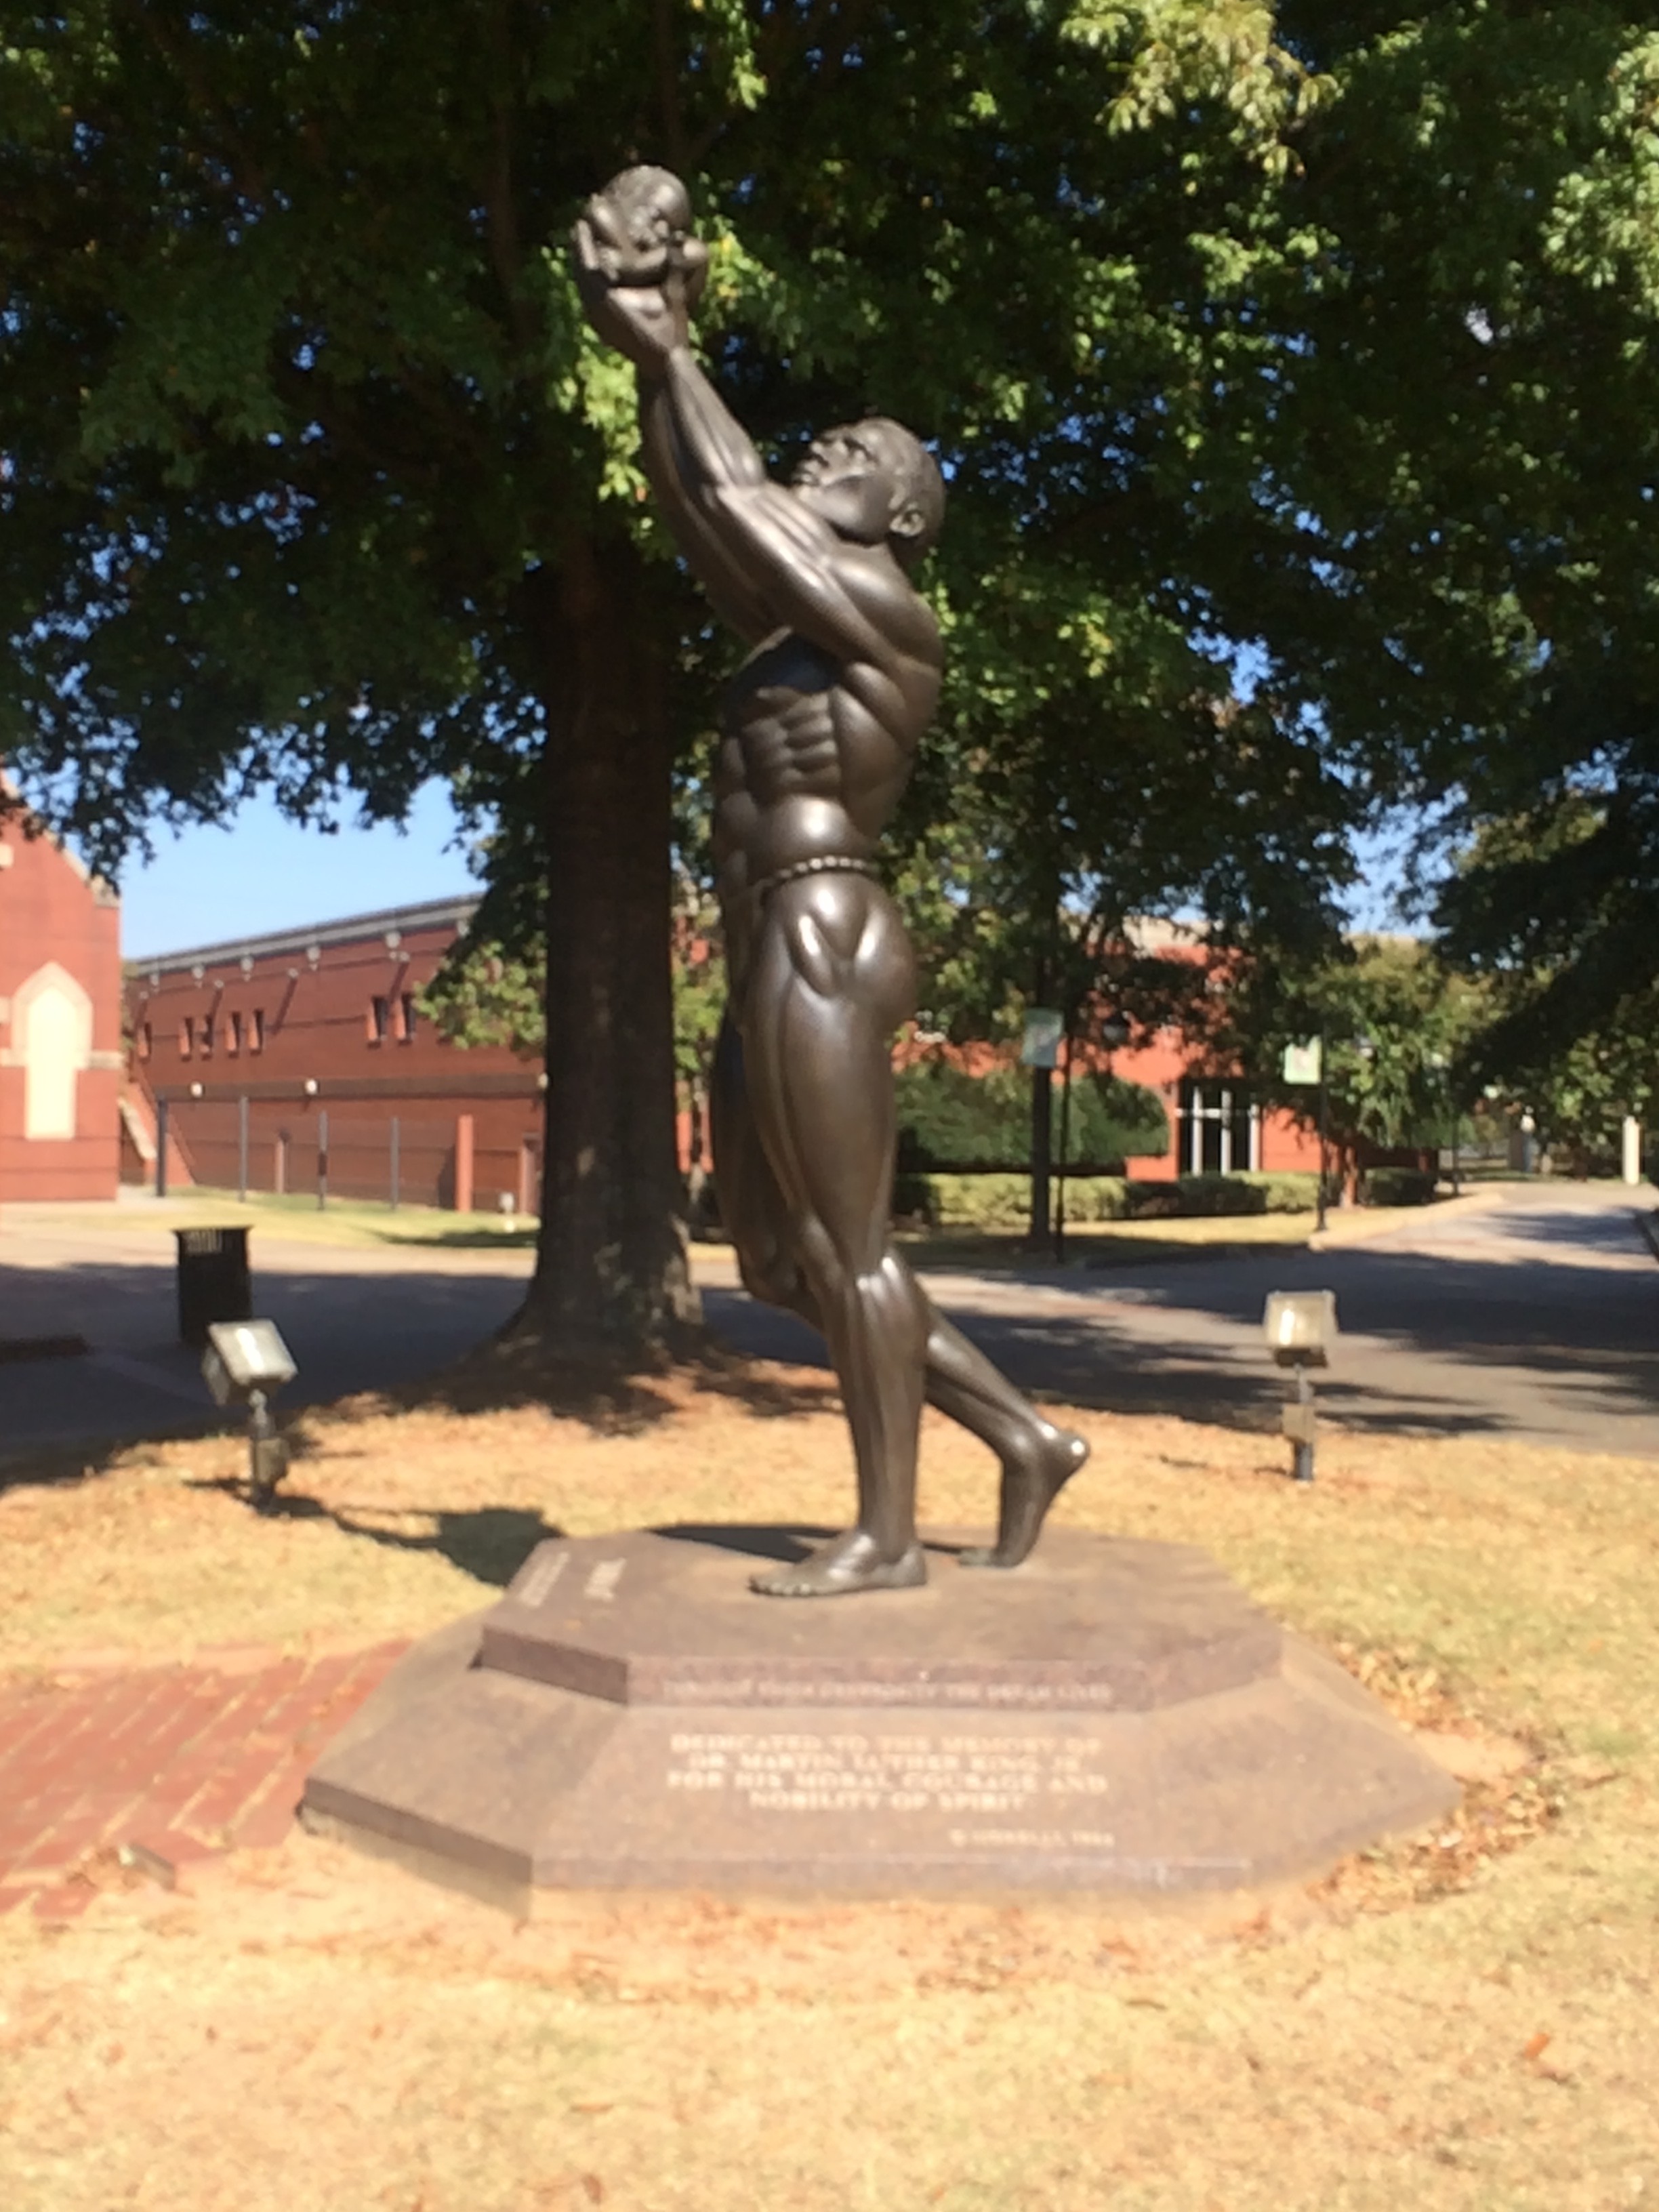 This is an image of the statue outside of the King National Historic Site. It is called "Behold" and is dedicated to the memory of Dr. Martin Luther King Jr. for his moral courage and nobility of spirit. It depicts the baptism of the infant Izzy by her father Kunte Kinte. 